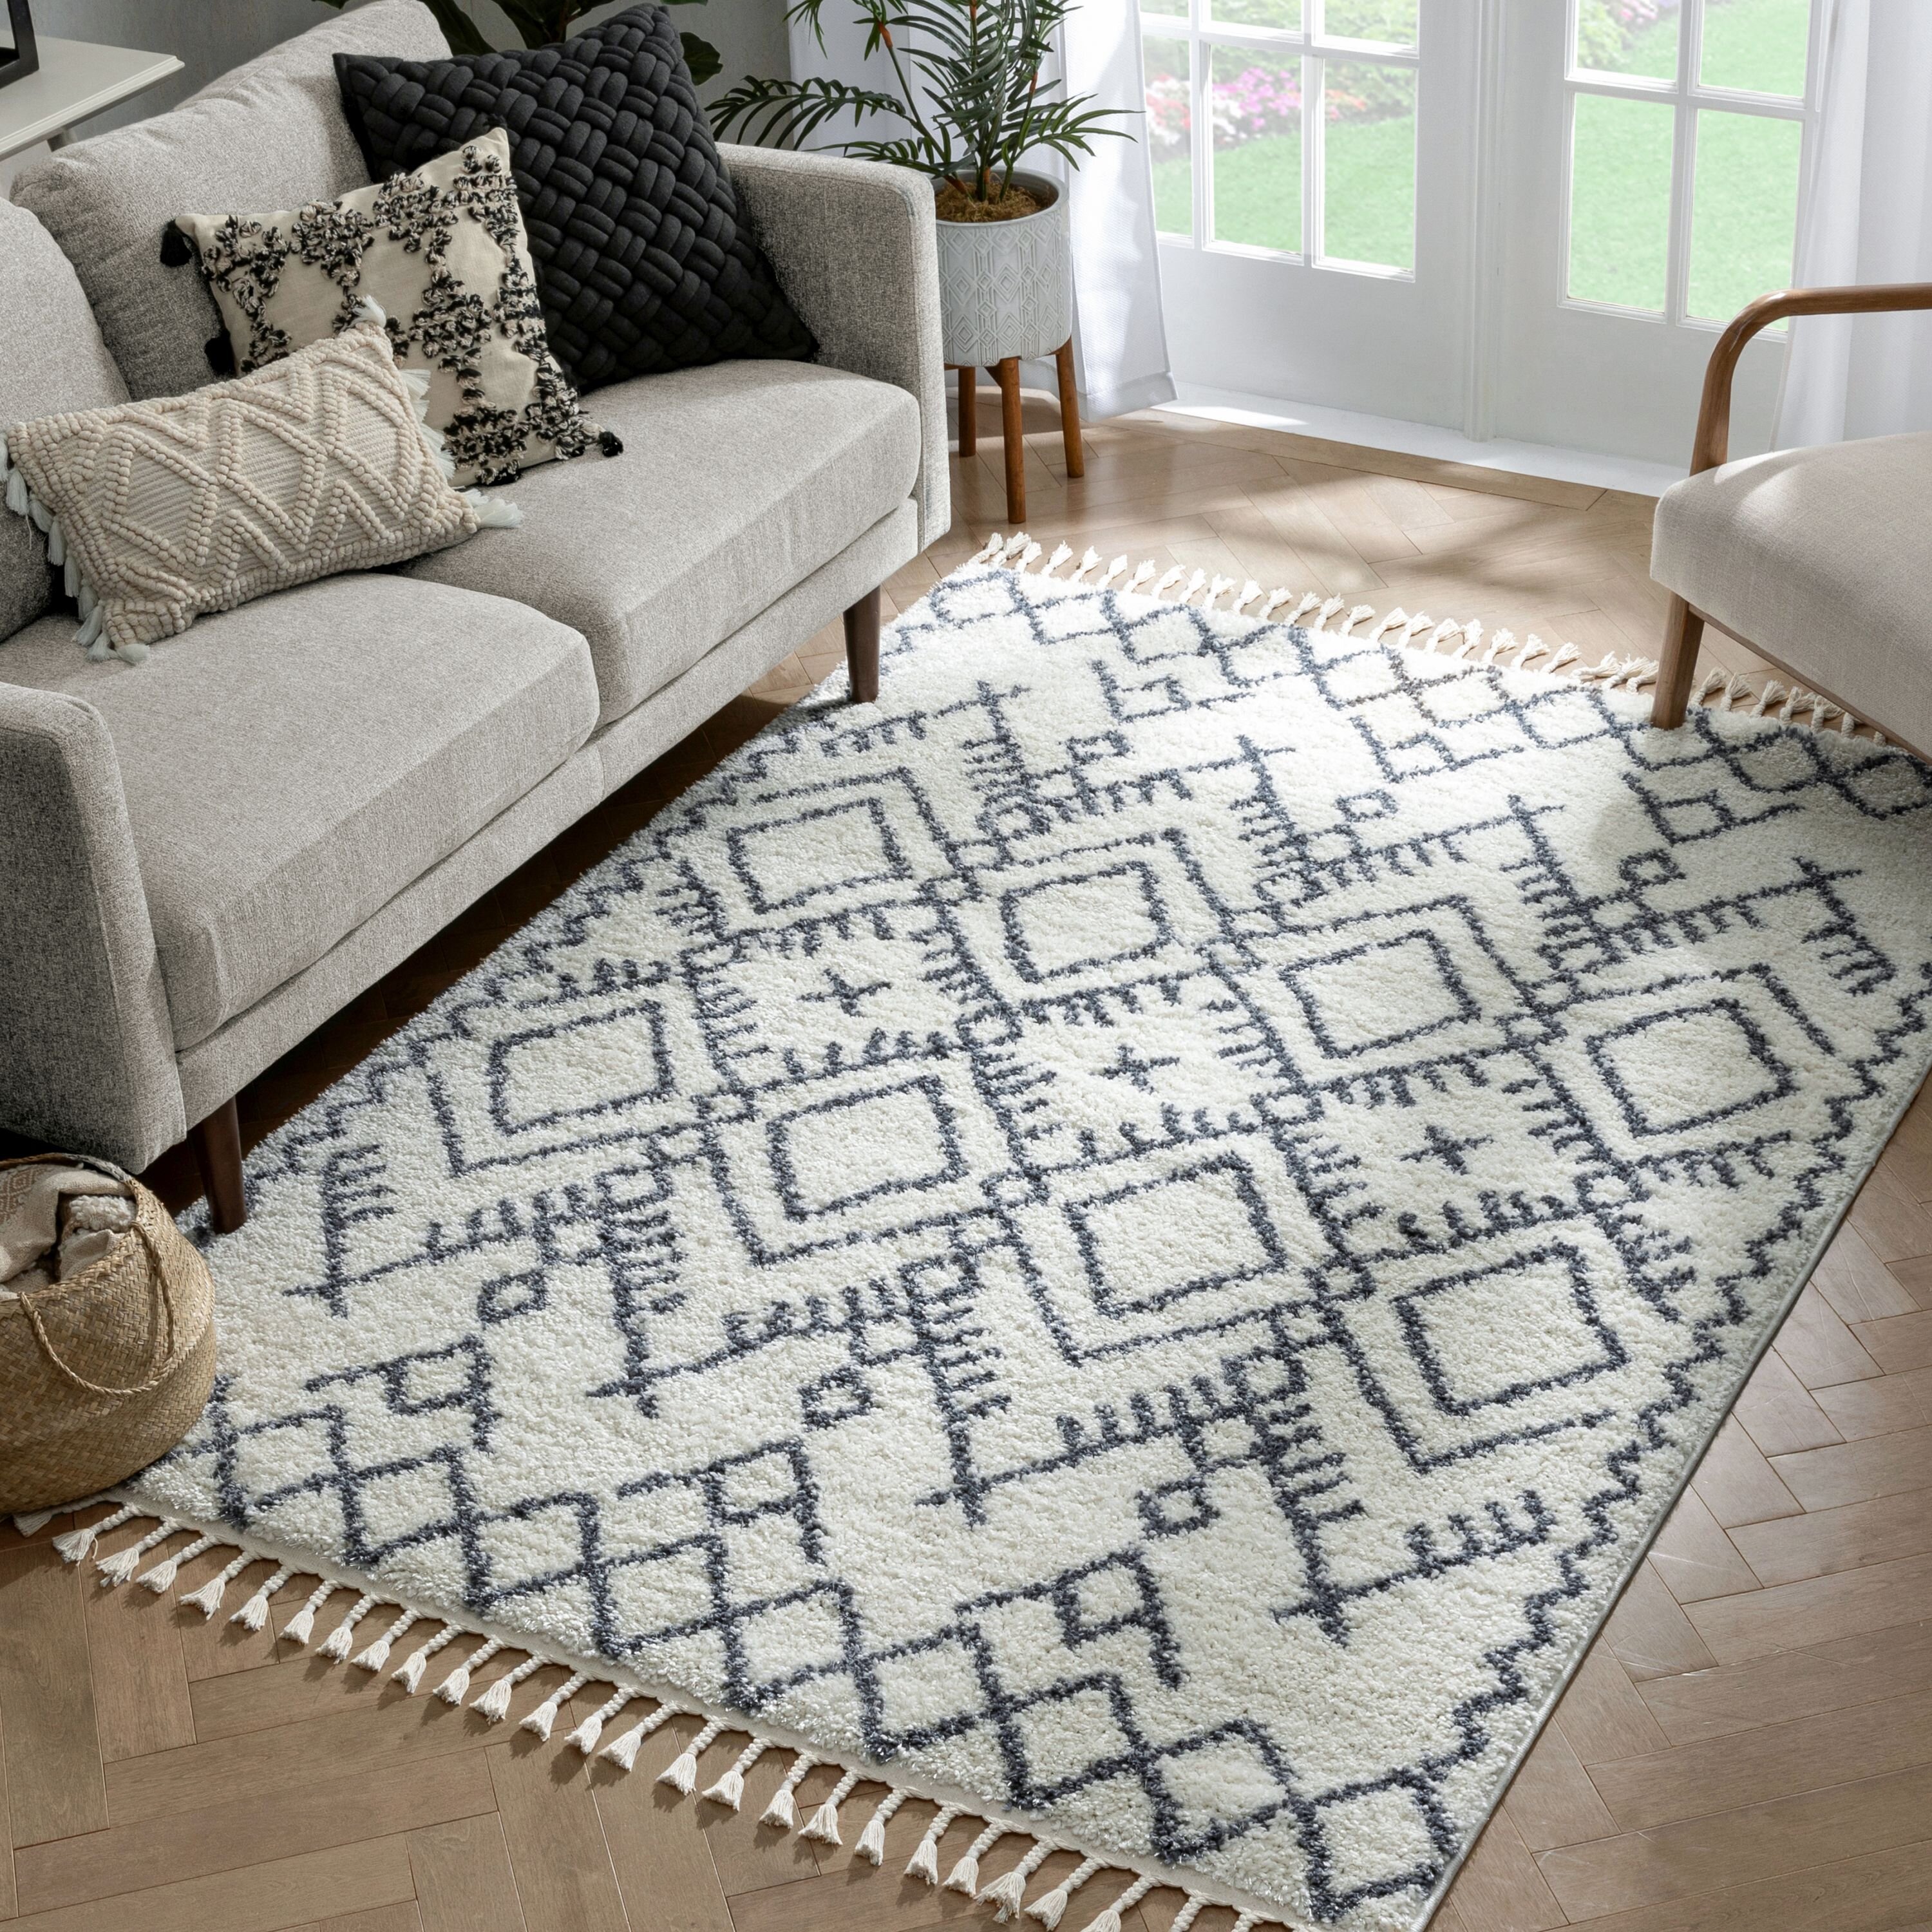 Union Rustic Giannini Geometric Moroccan Area Rug in Gray/ Off White &  Reviews